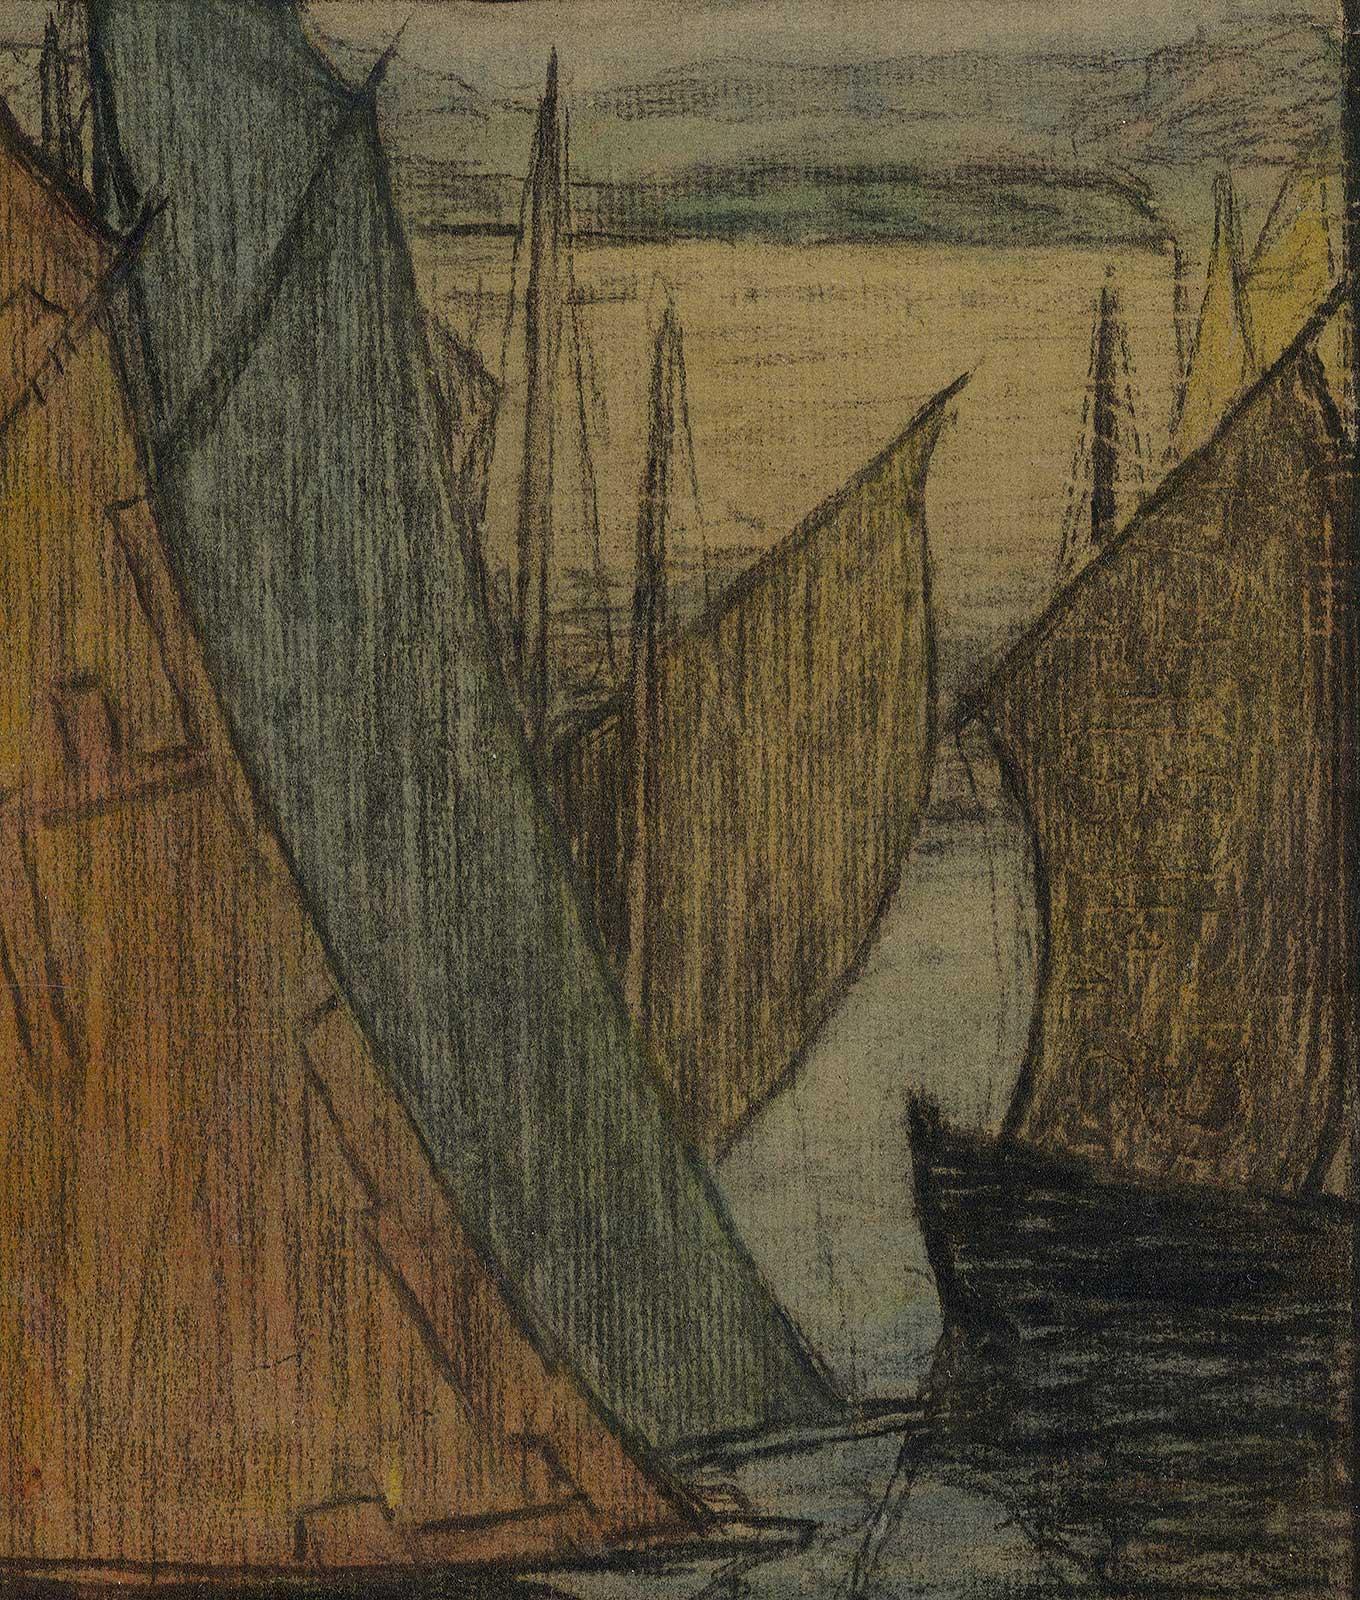 River Aglow (color charcoal and pastel on paper of sailboats on sea) - Art by Brunetta Herman Crawford